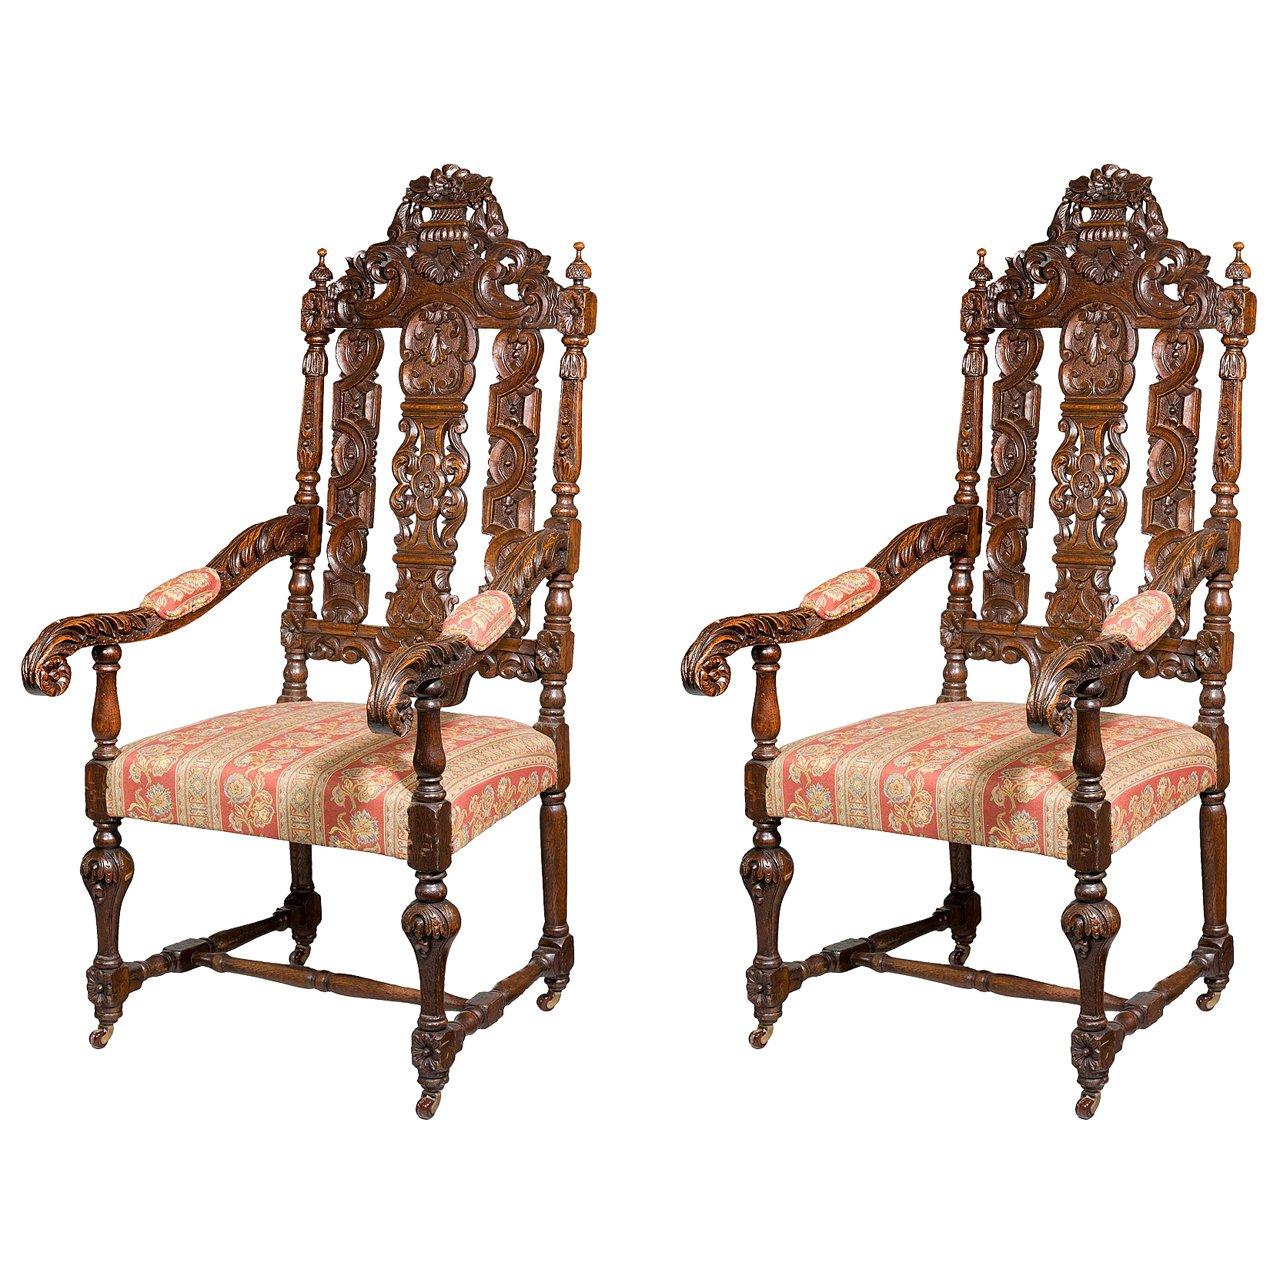 Pair of 17th Century Style Oak Chairs